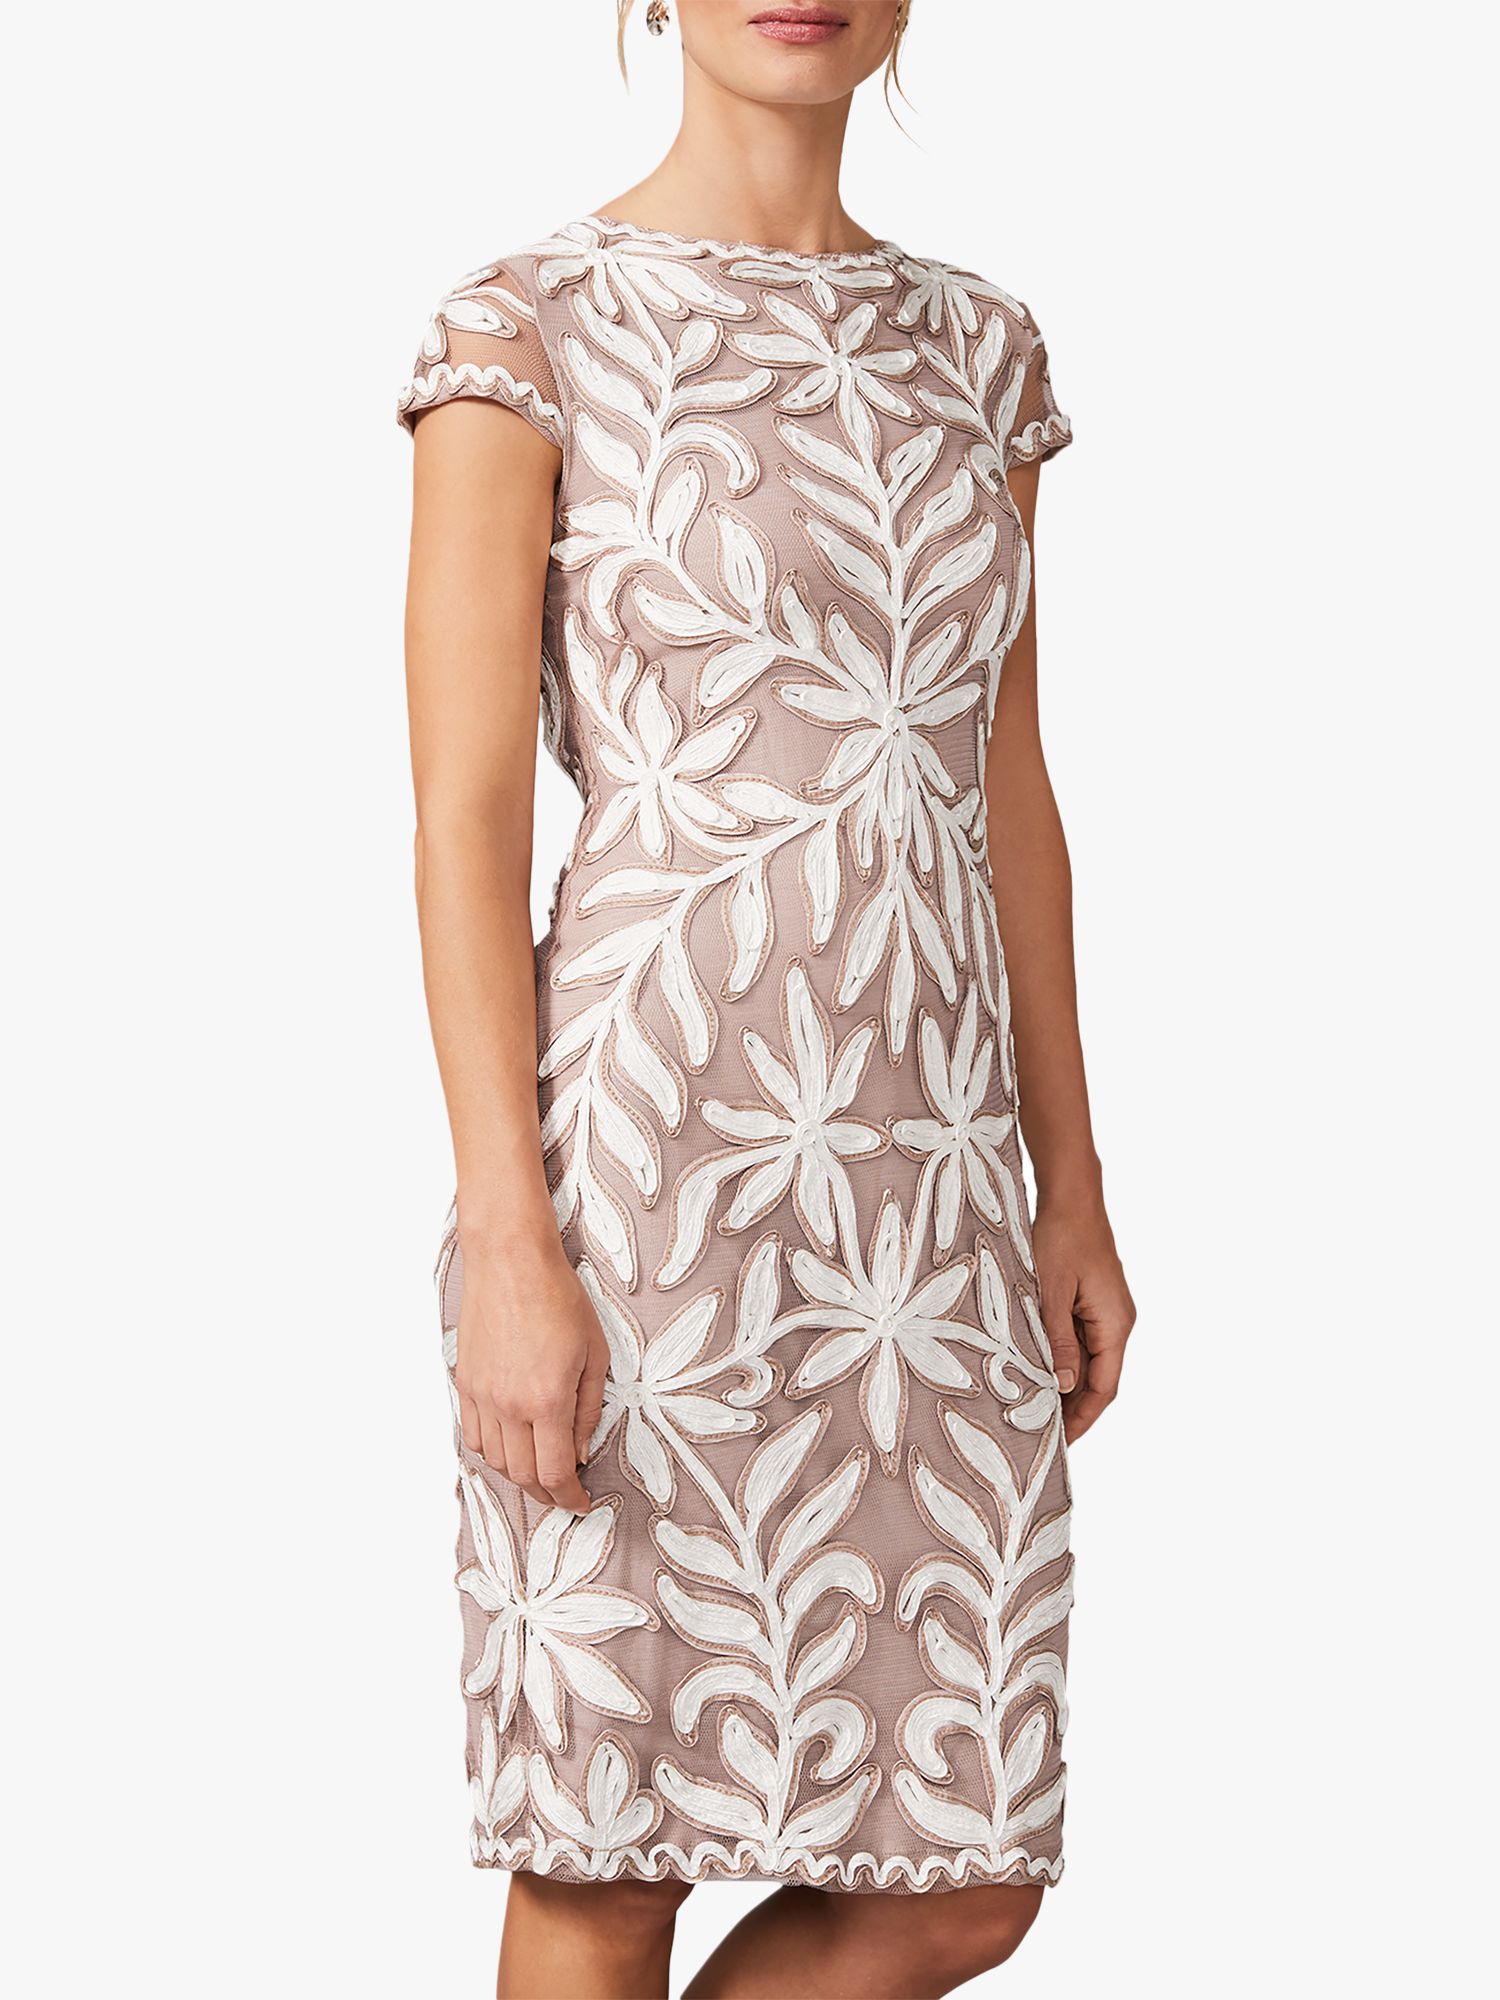 Phase Eight Isobel Floral Tapework Tailored Dress, Taupe/Ivory at John Lewis & Partners